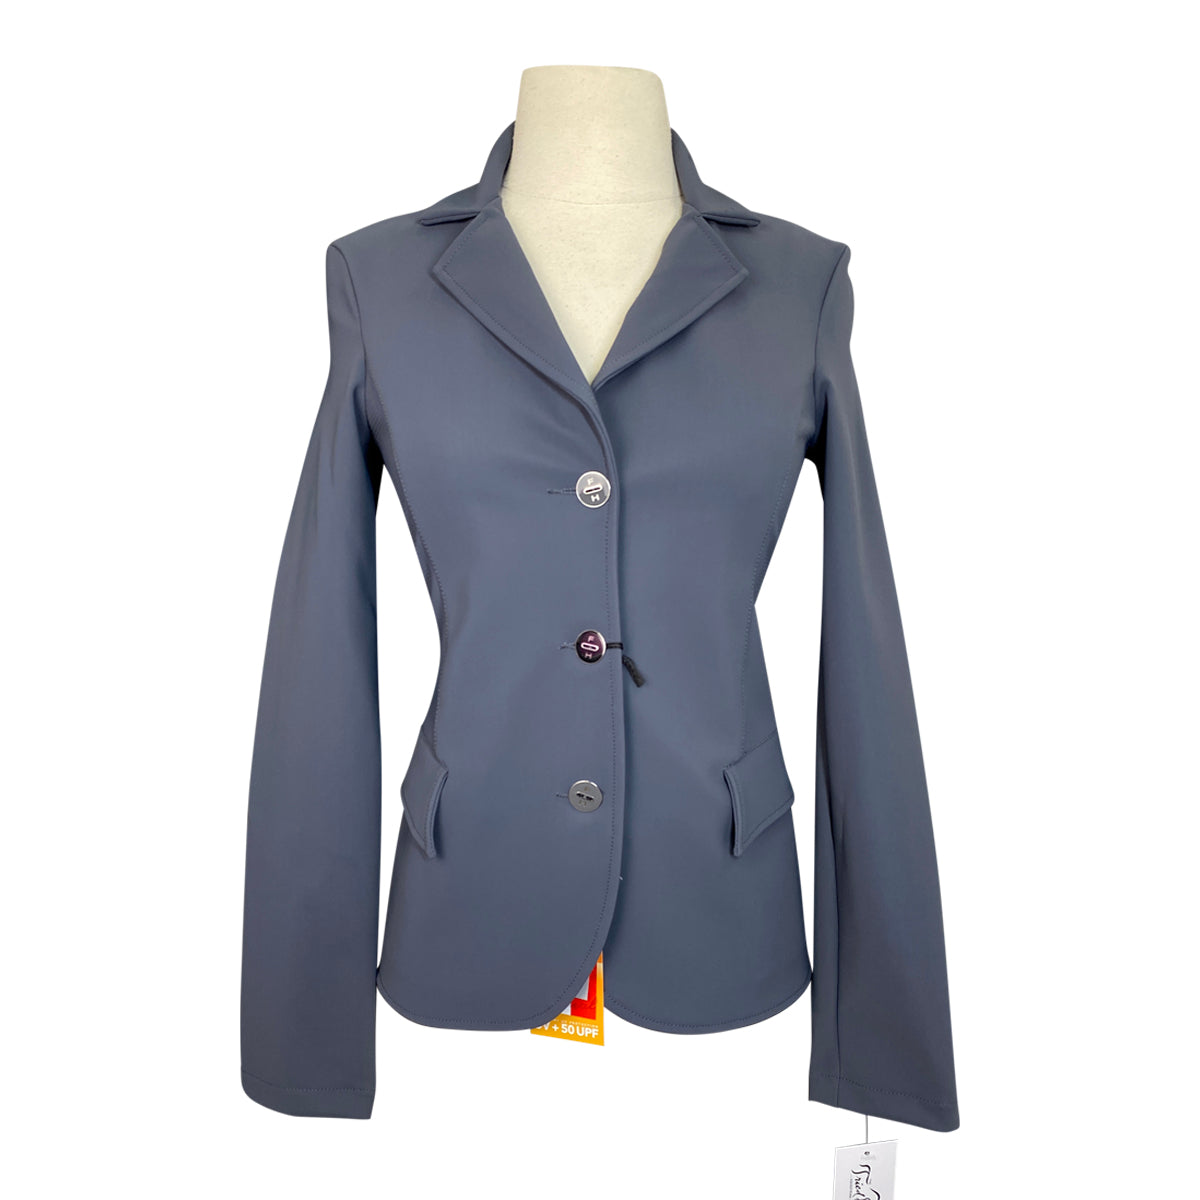 For Horses 'Chiara' Airflow Show Jacket in Charcoal